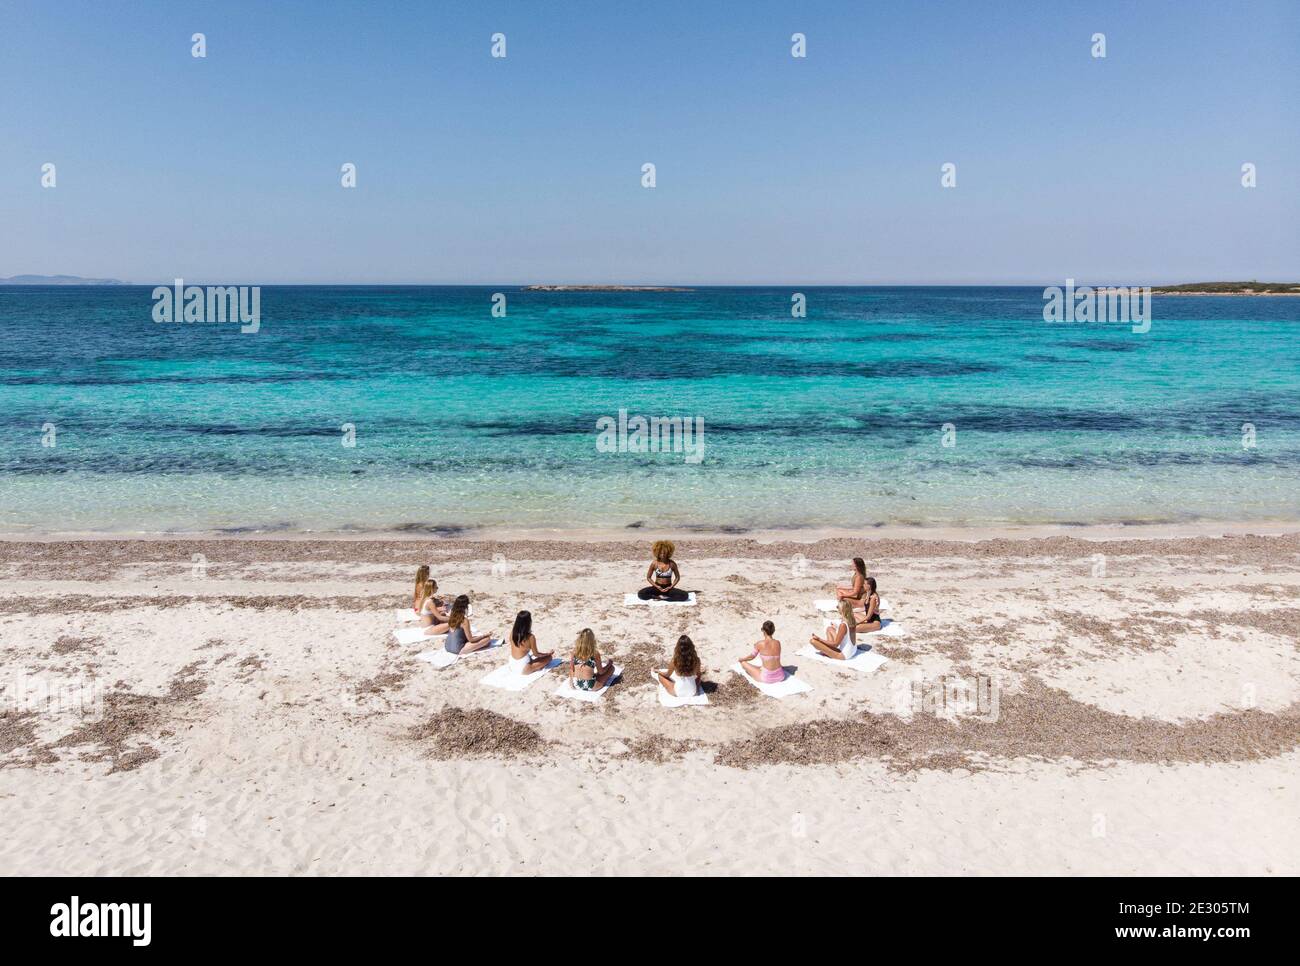 Es Trench High Resolution Stock Photography and Images - Alamy